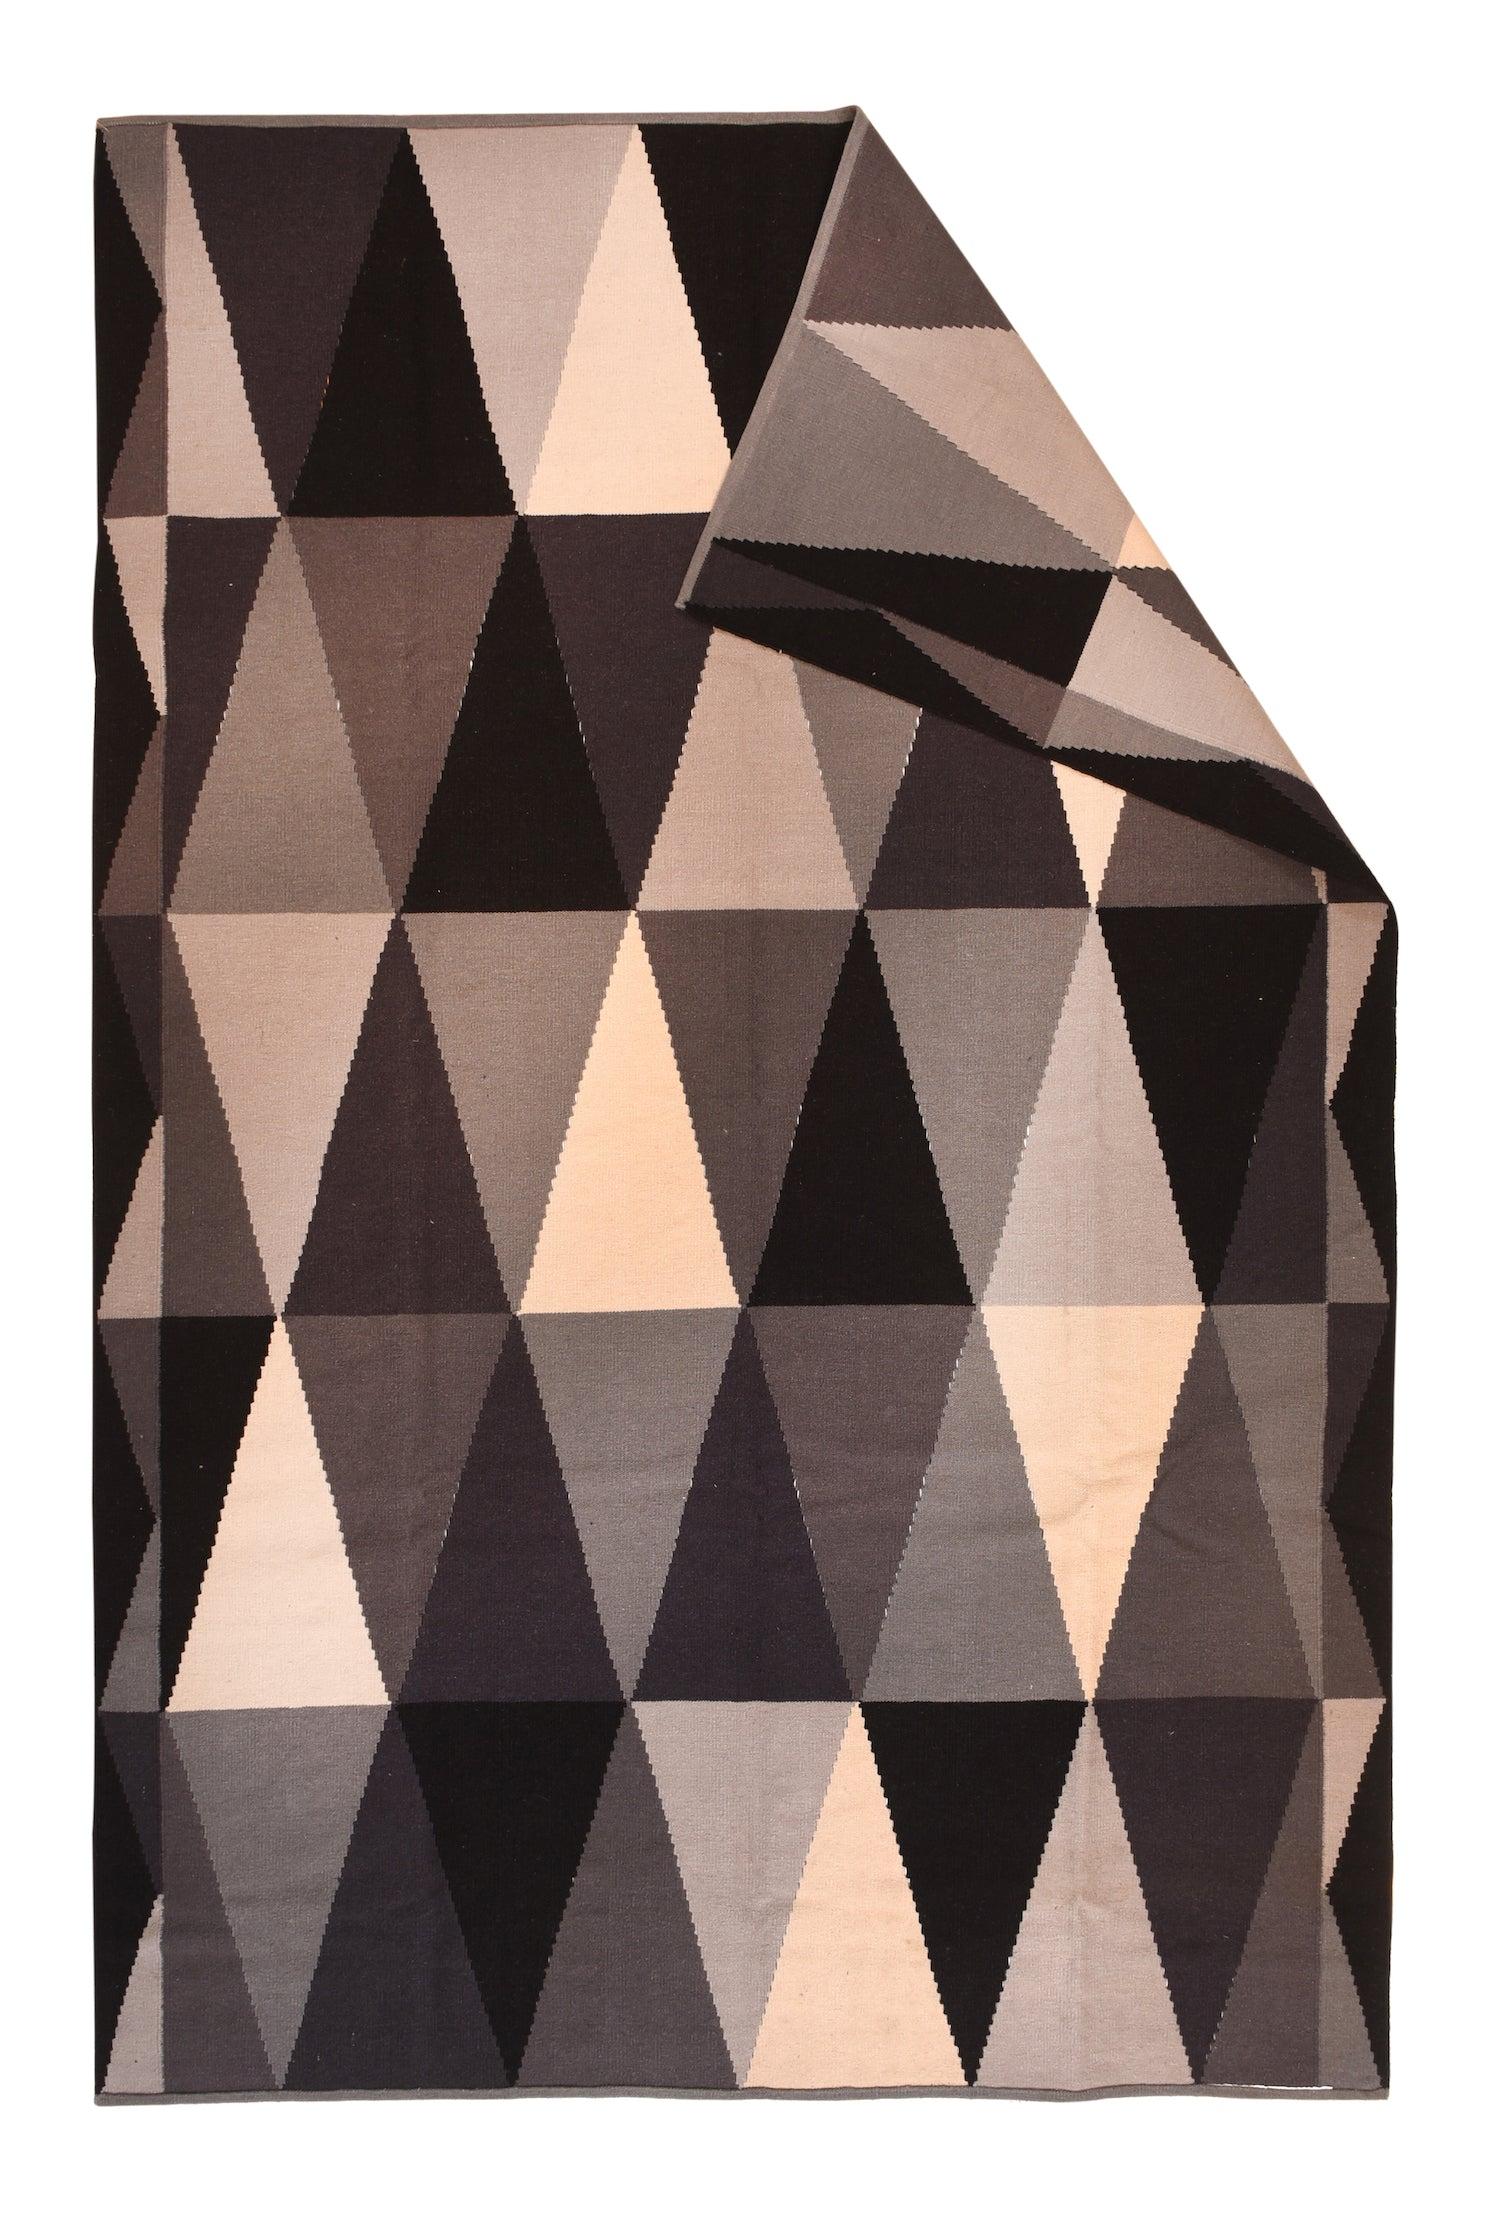 Almost certainly European, totally geometric triangle pattern in aggressively neutral tones.
With only narrow side borders of skinny triangles, the dominant field hosts five rows of tall, oblique triangles in cream and shades of grey-brown. Tiny